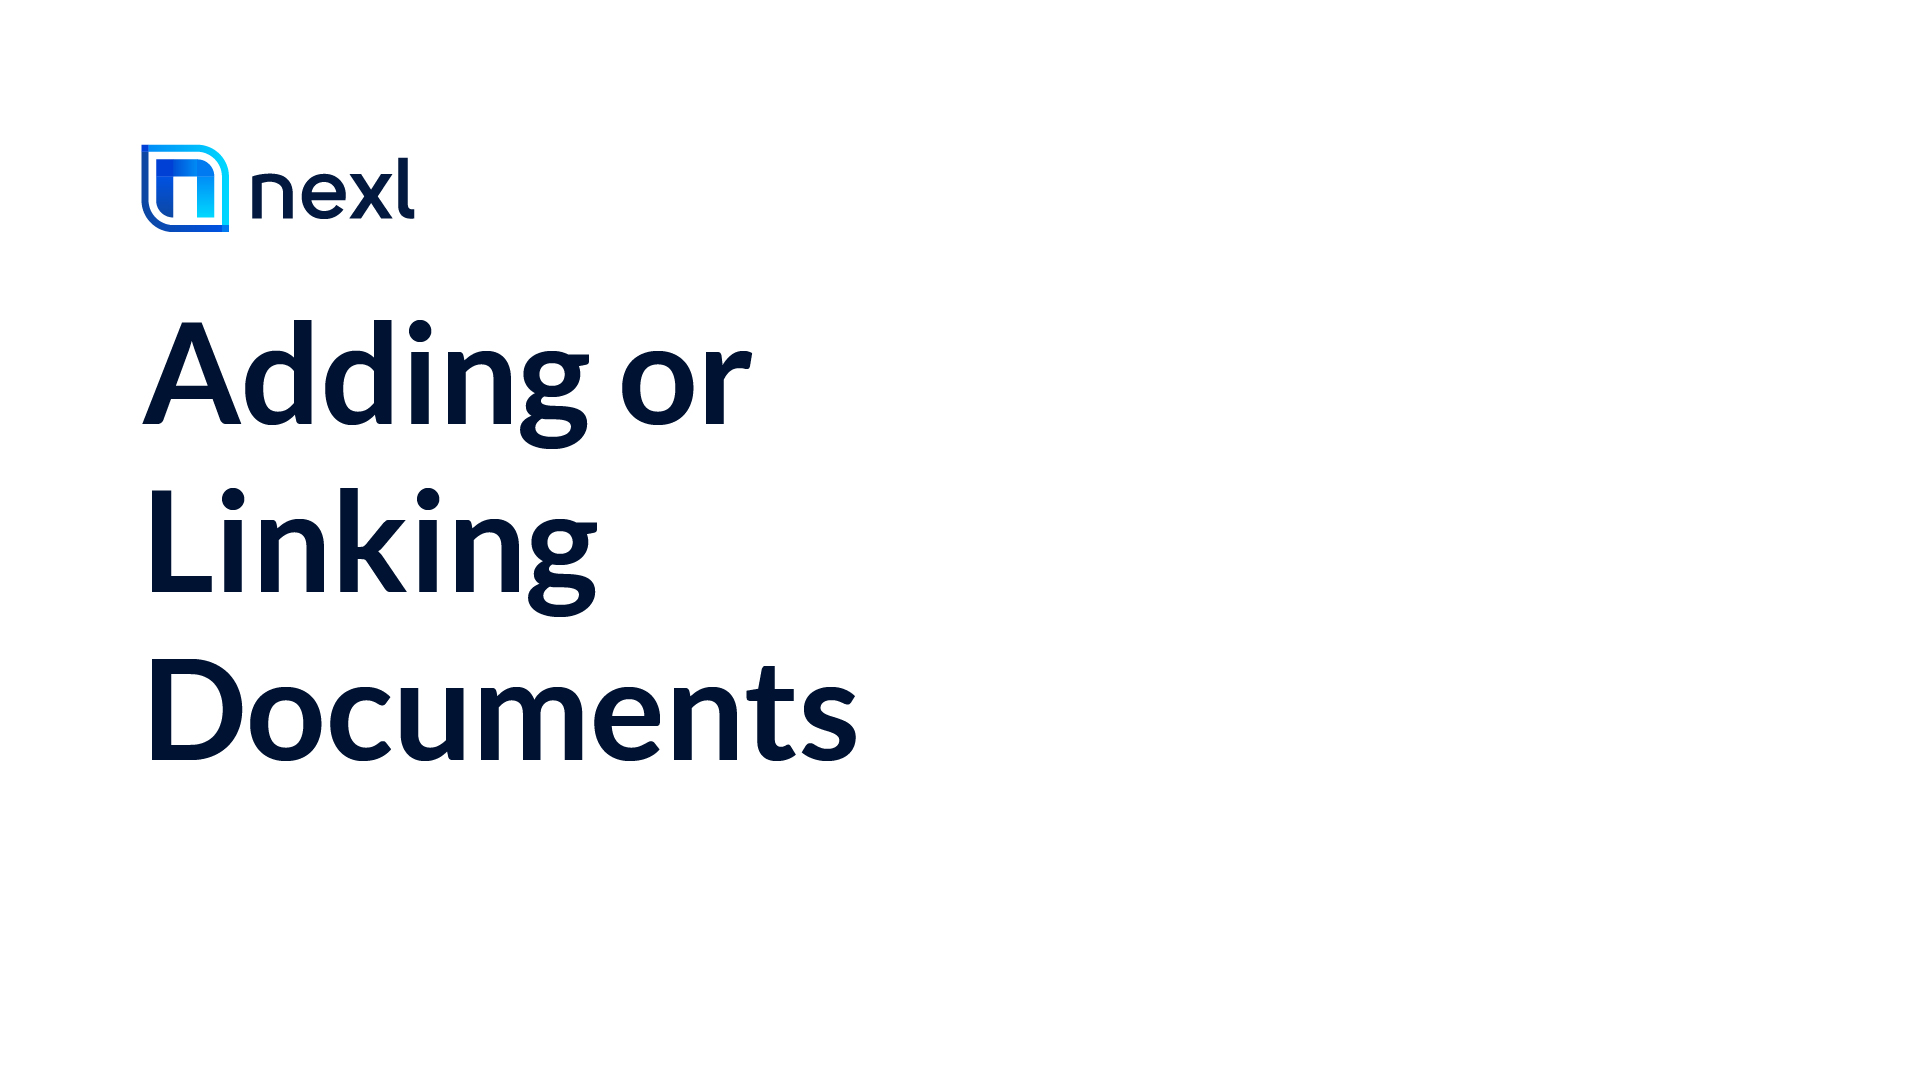 Adding or Linking Documents